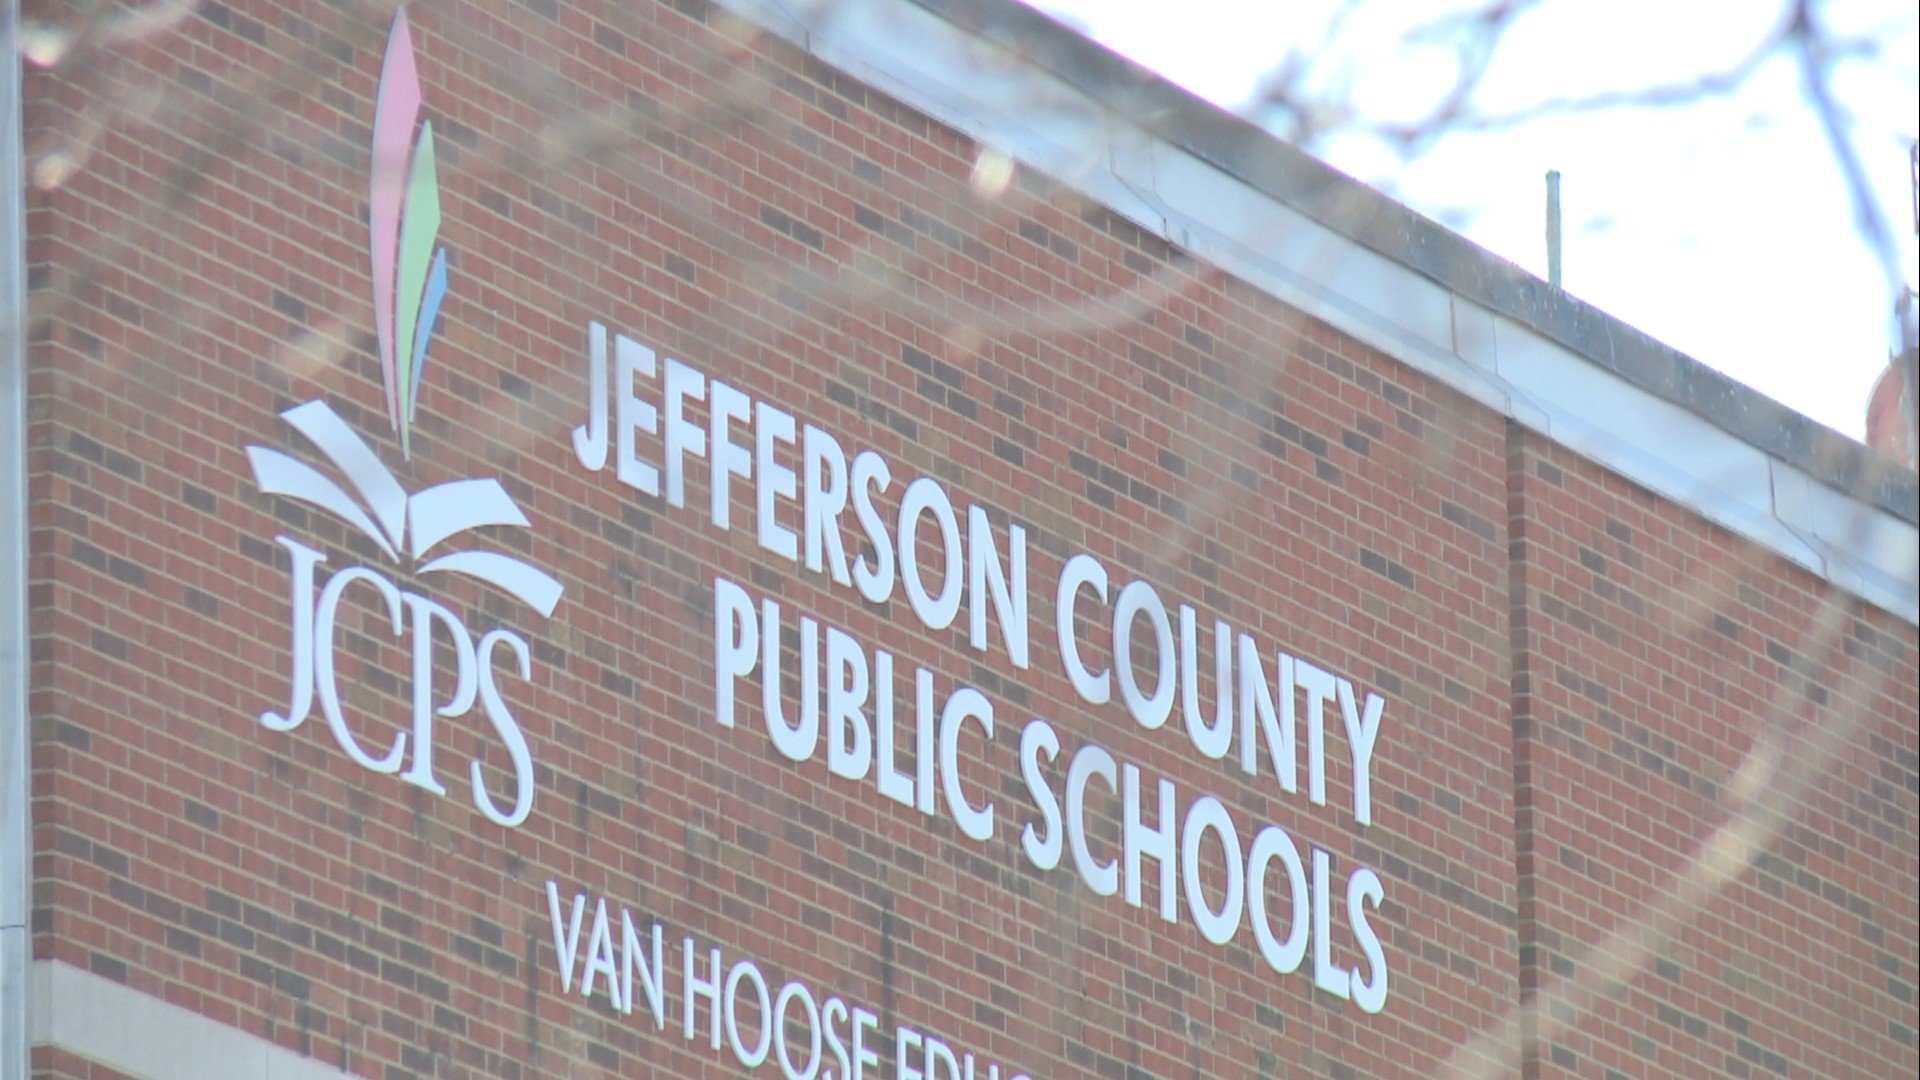 If passed by the full House committee, the task force would study the size of JCPS and would explore options of creating multiple school districts within it.